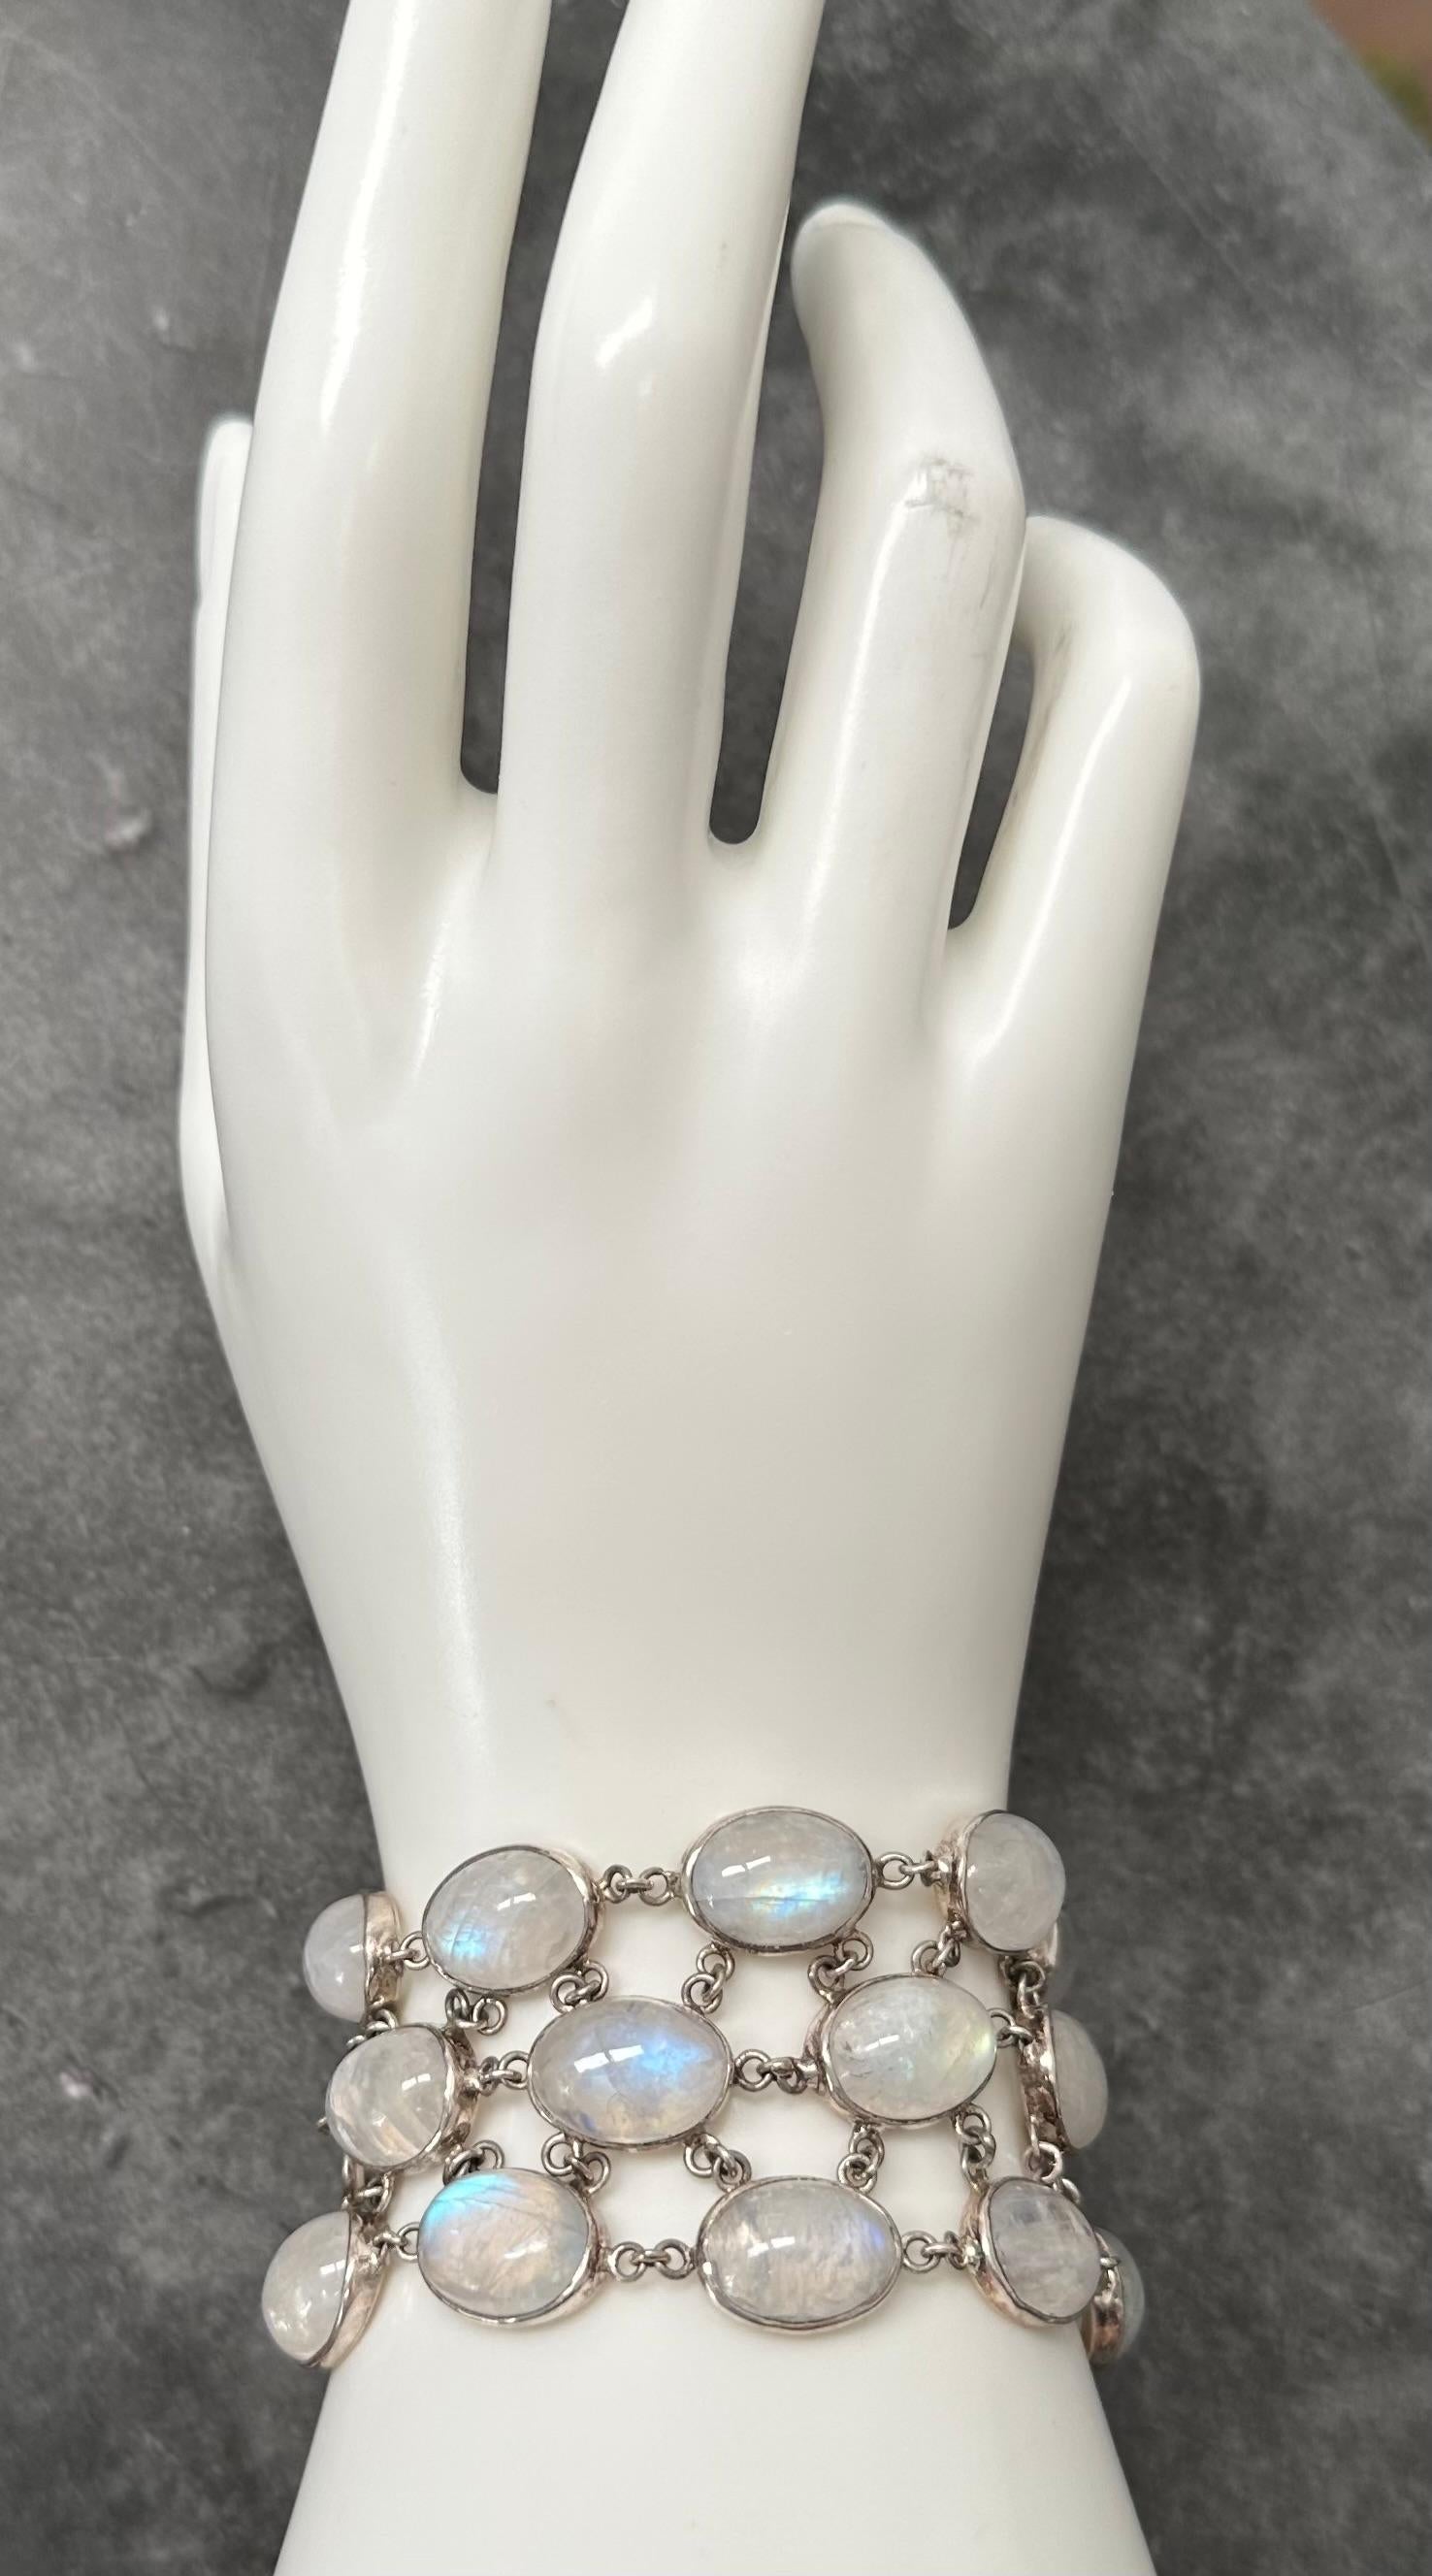 Twenty large 10 x 14 mm oval cabochons of blue sheen rainbow moonstones are arranged in 3 offset linkages in simple handmade bezels in this one of a kind bracelet.  Each stone is attached to the others nearby via multiple jump rings to fit